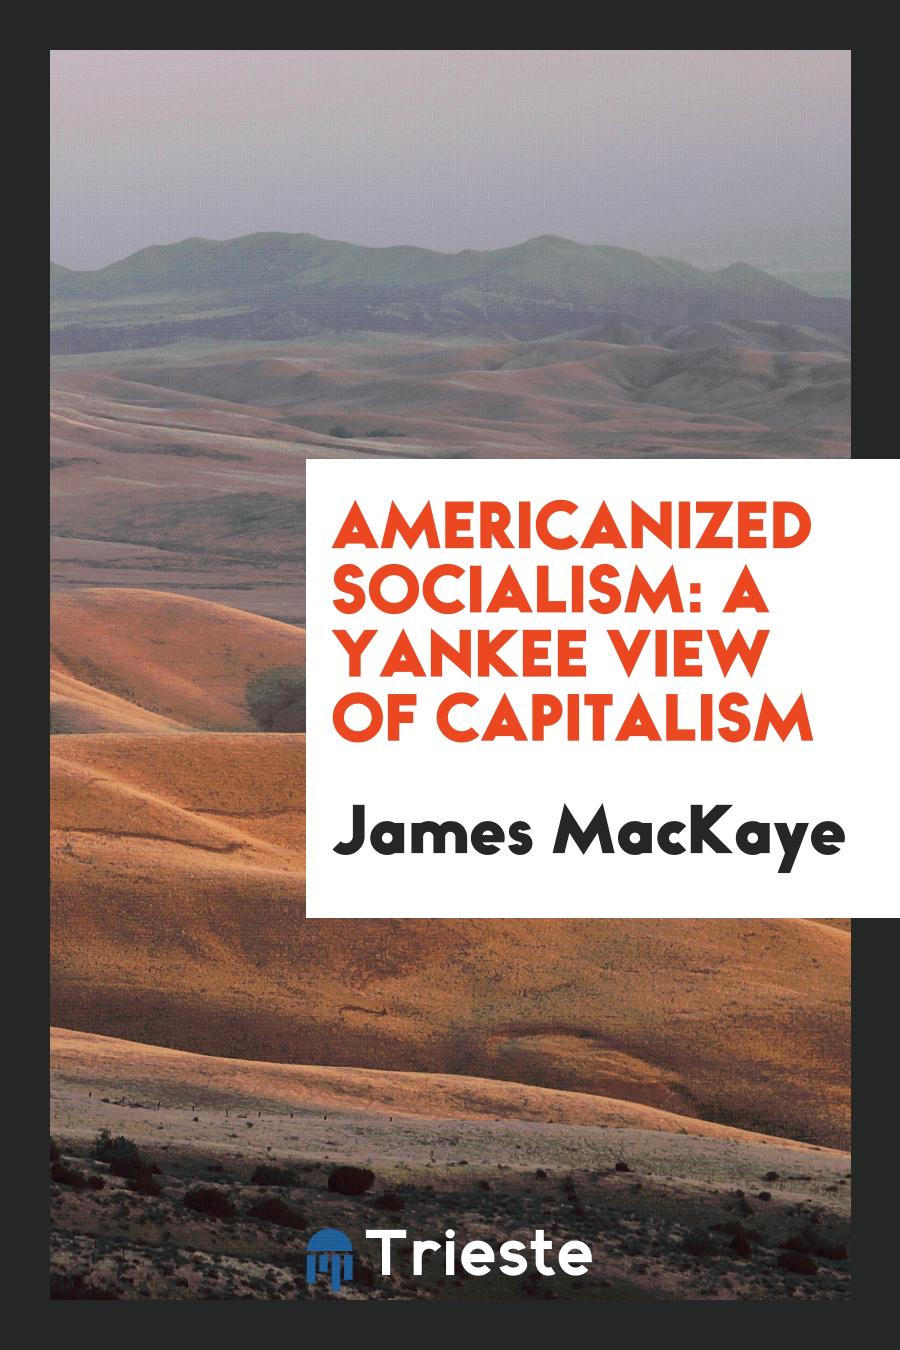 Americanized Socialism: A Yankee View of Capitalism